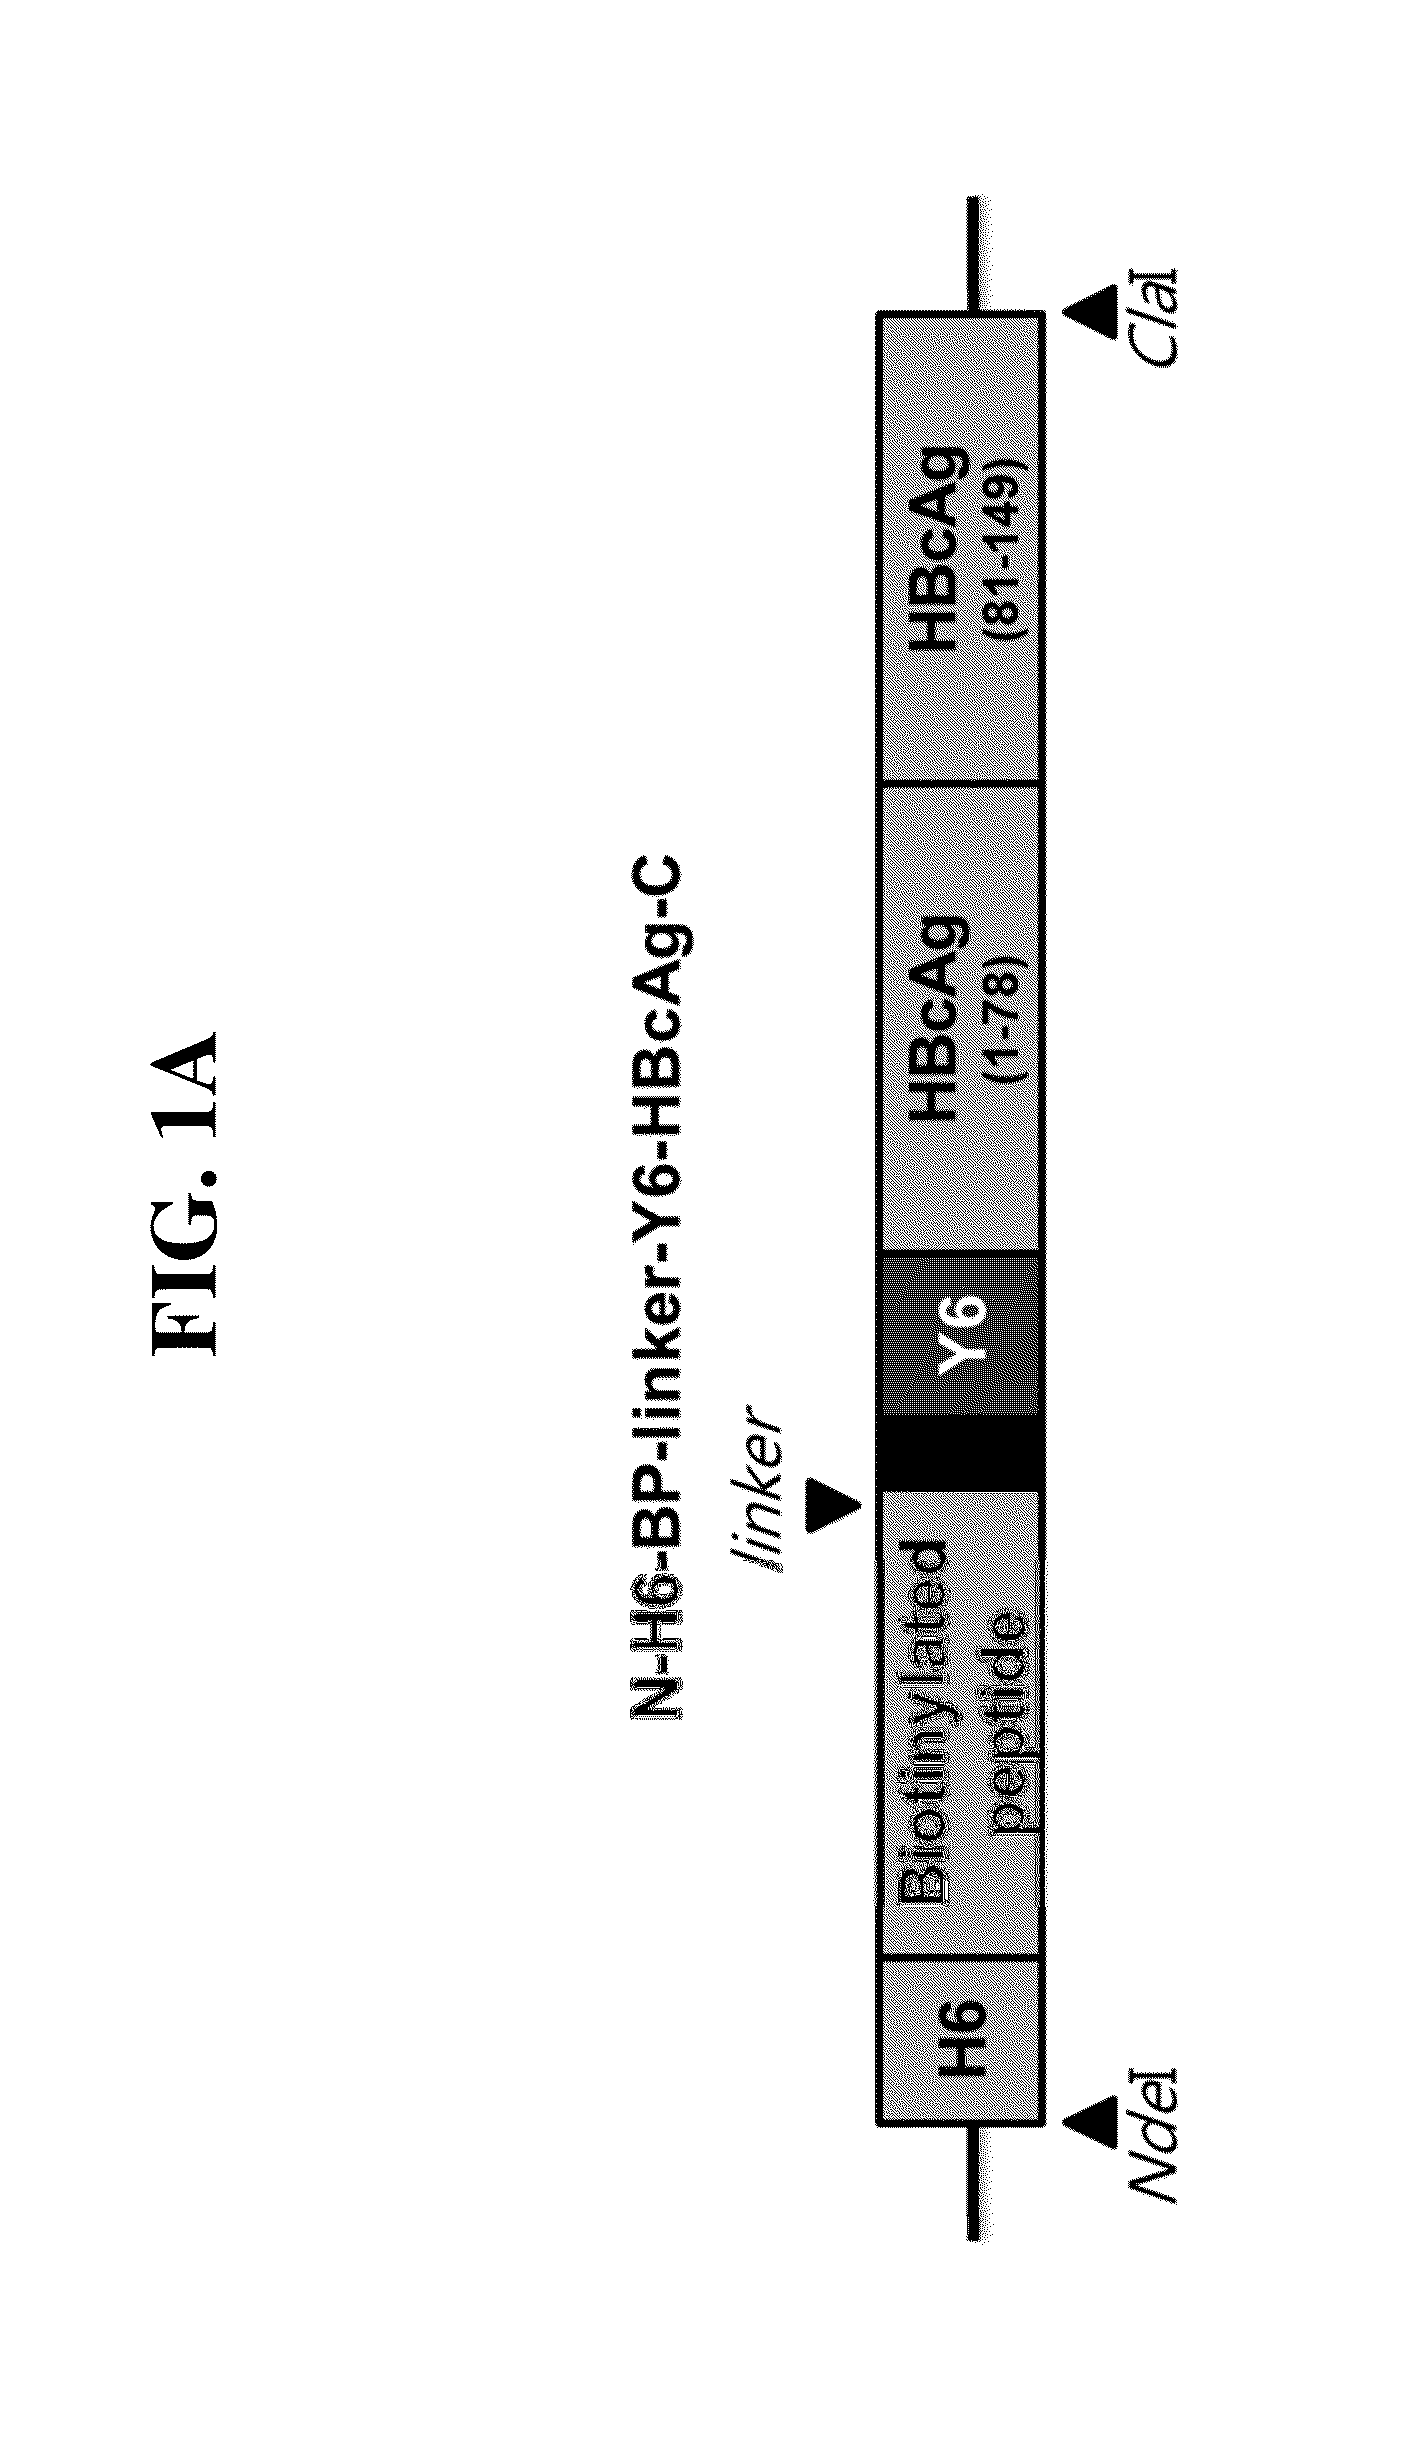 Recombinant self-assembling protein comprising target-oriented peptide and use thereof